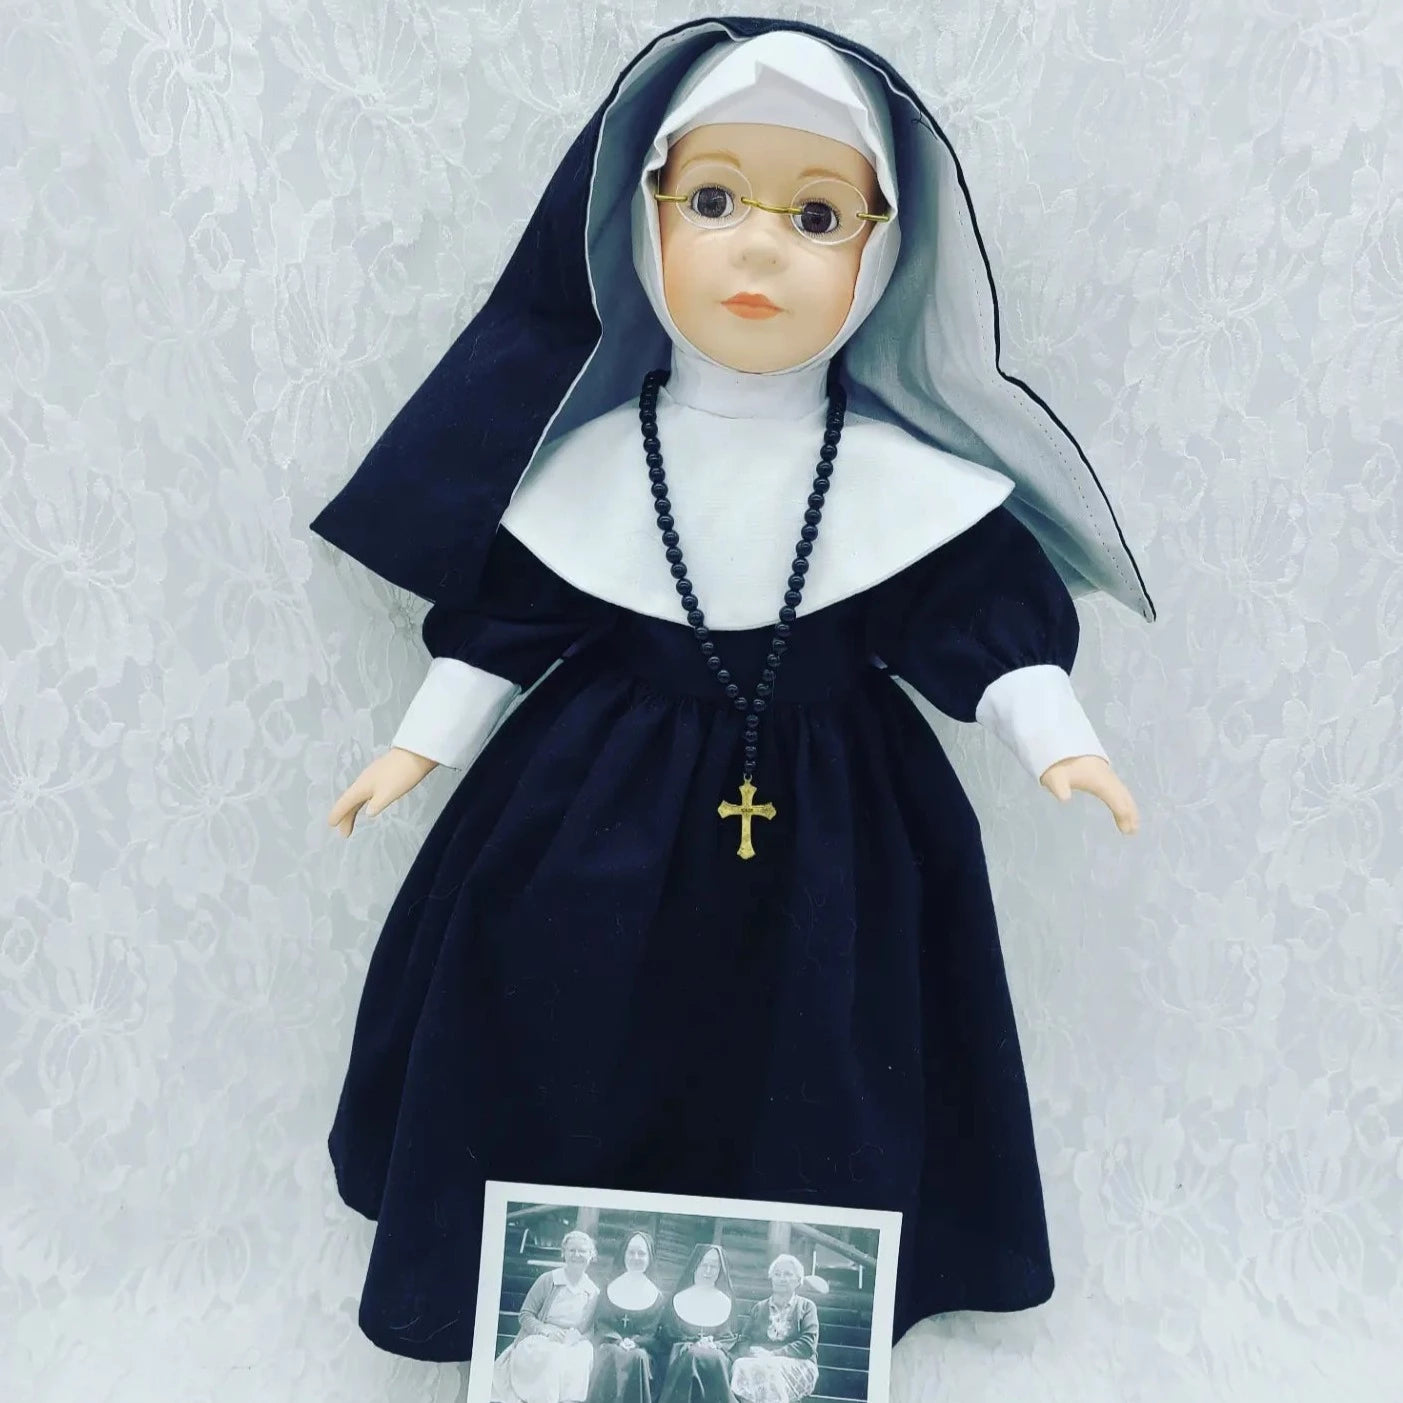 Reserved Emily 8/24 Sister Rose Carmel ~ 17" Porcelain Nun Doll ~ Paranormal ~ Comes with Photograph ~ Strange History